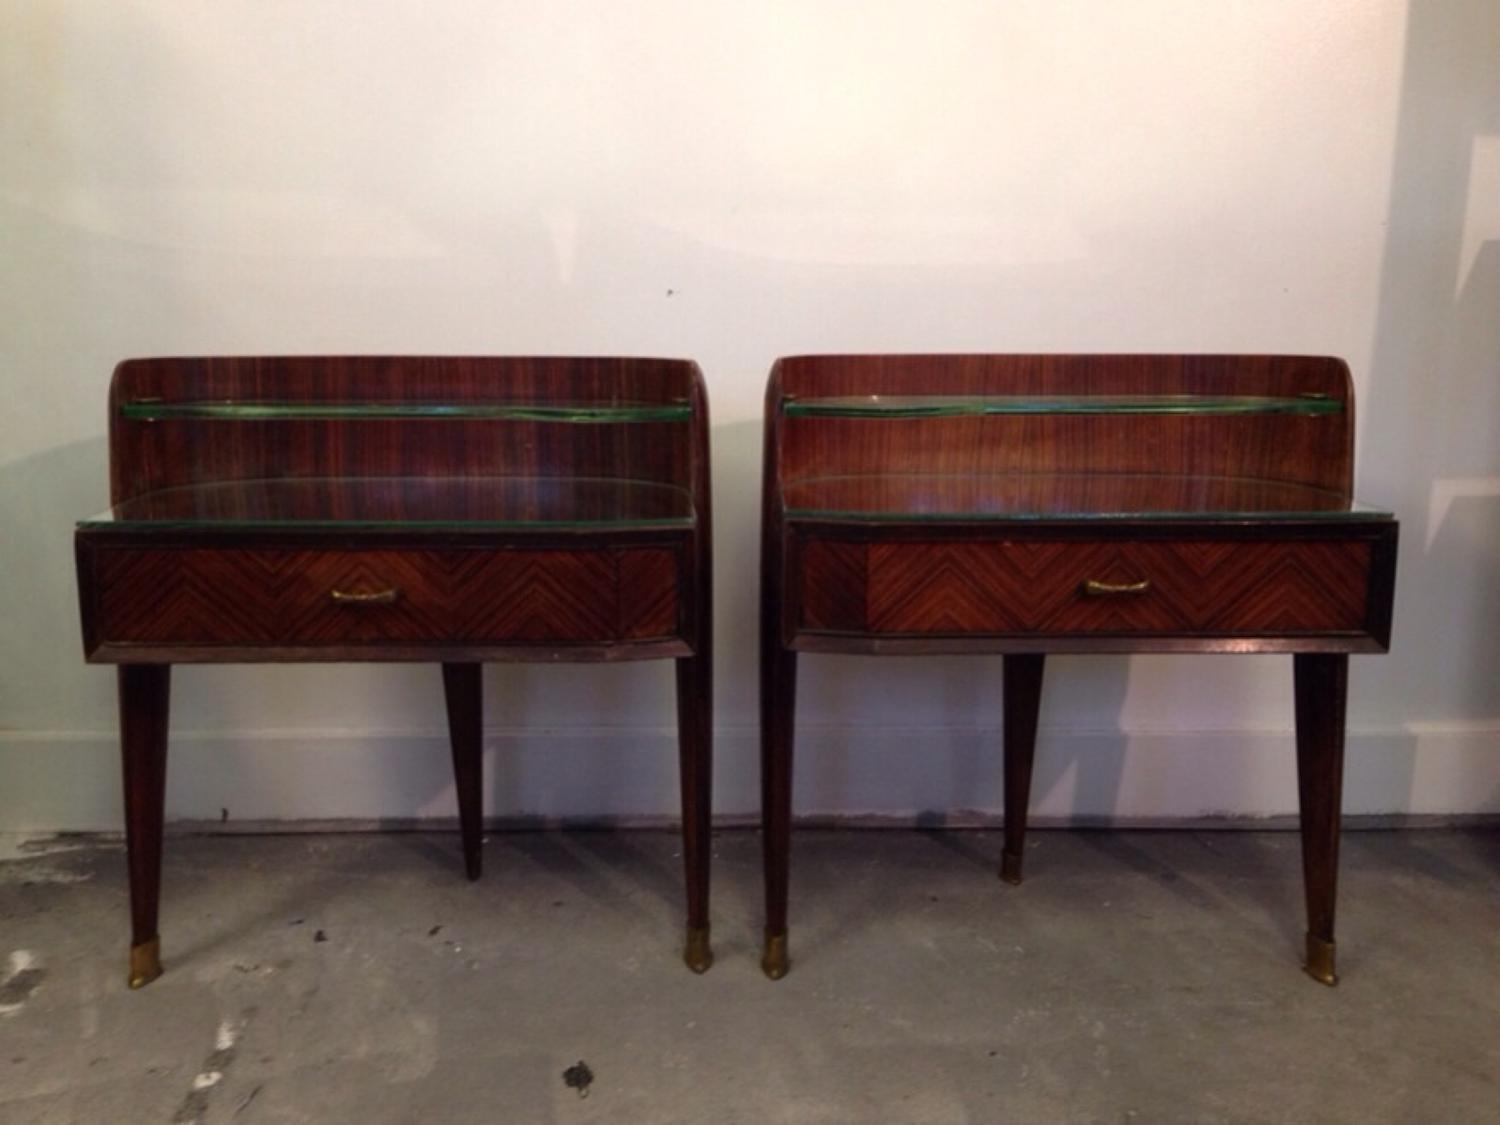 A pair of rosewood bedside tables